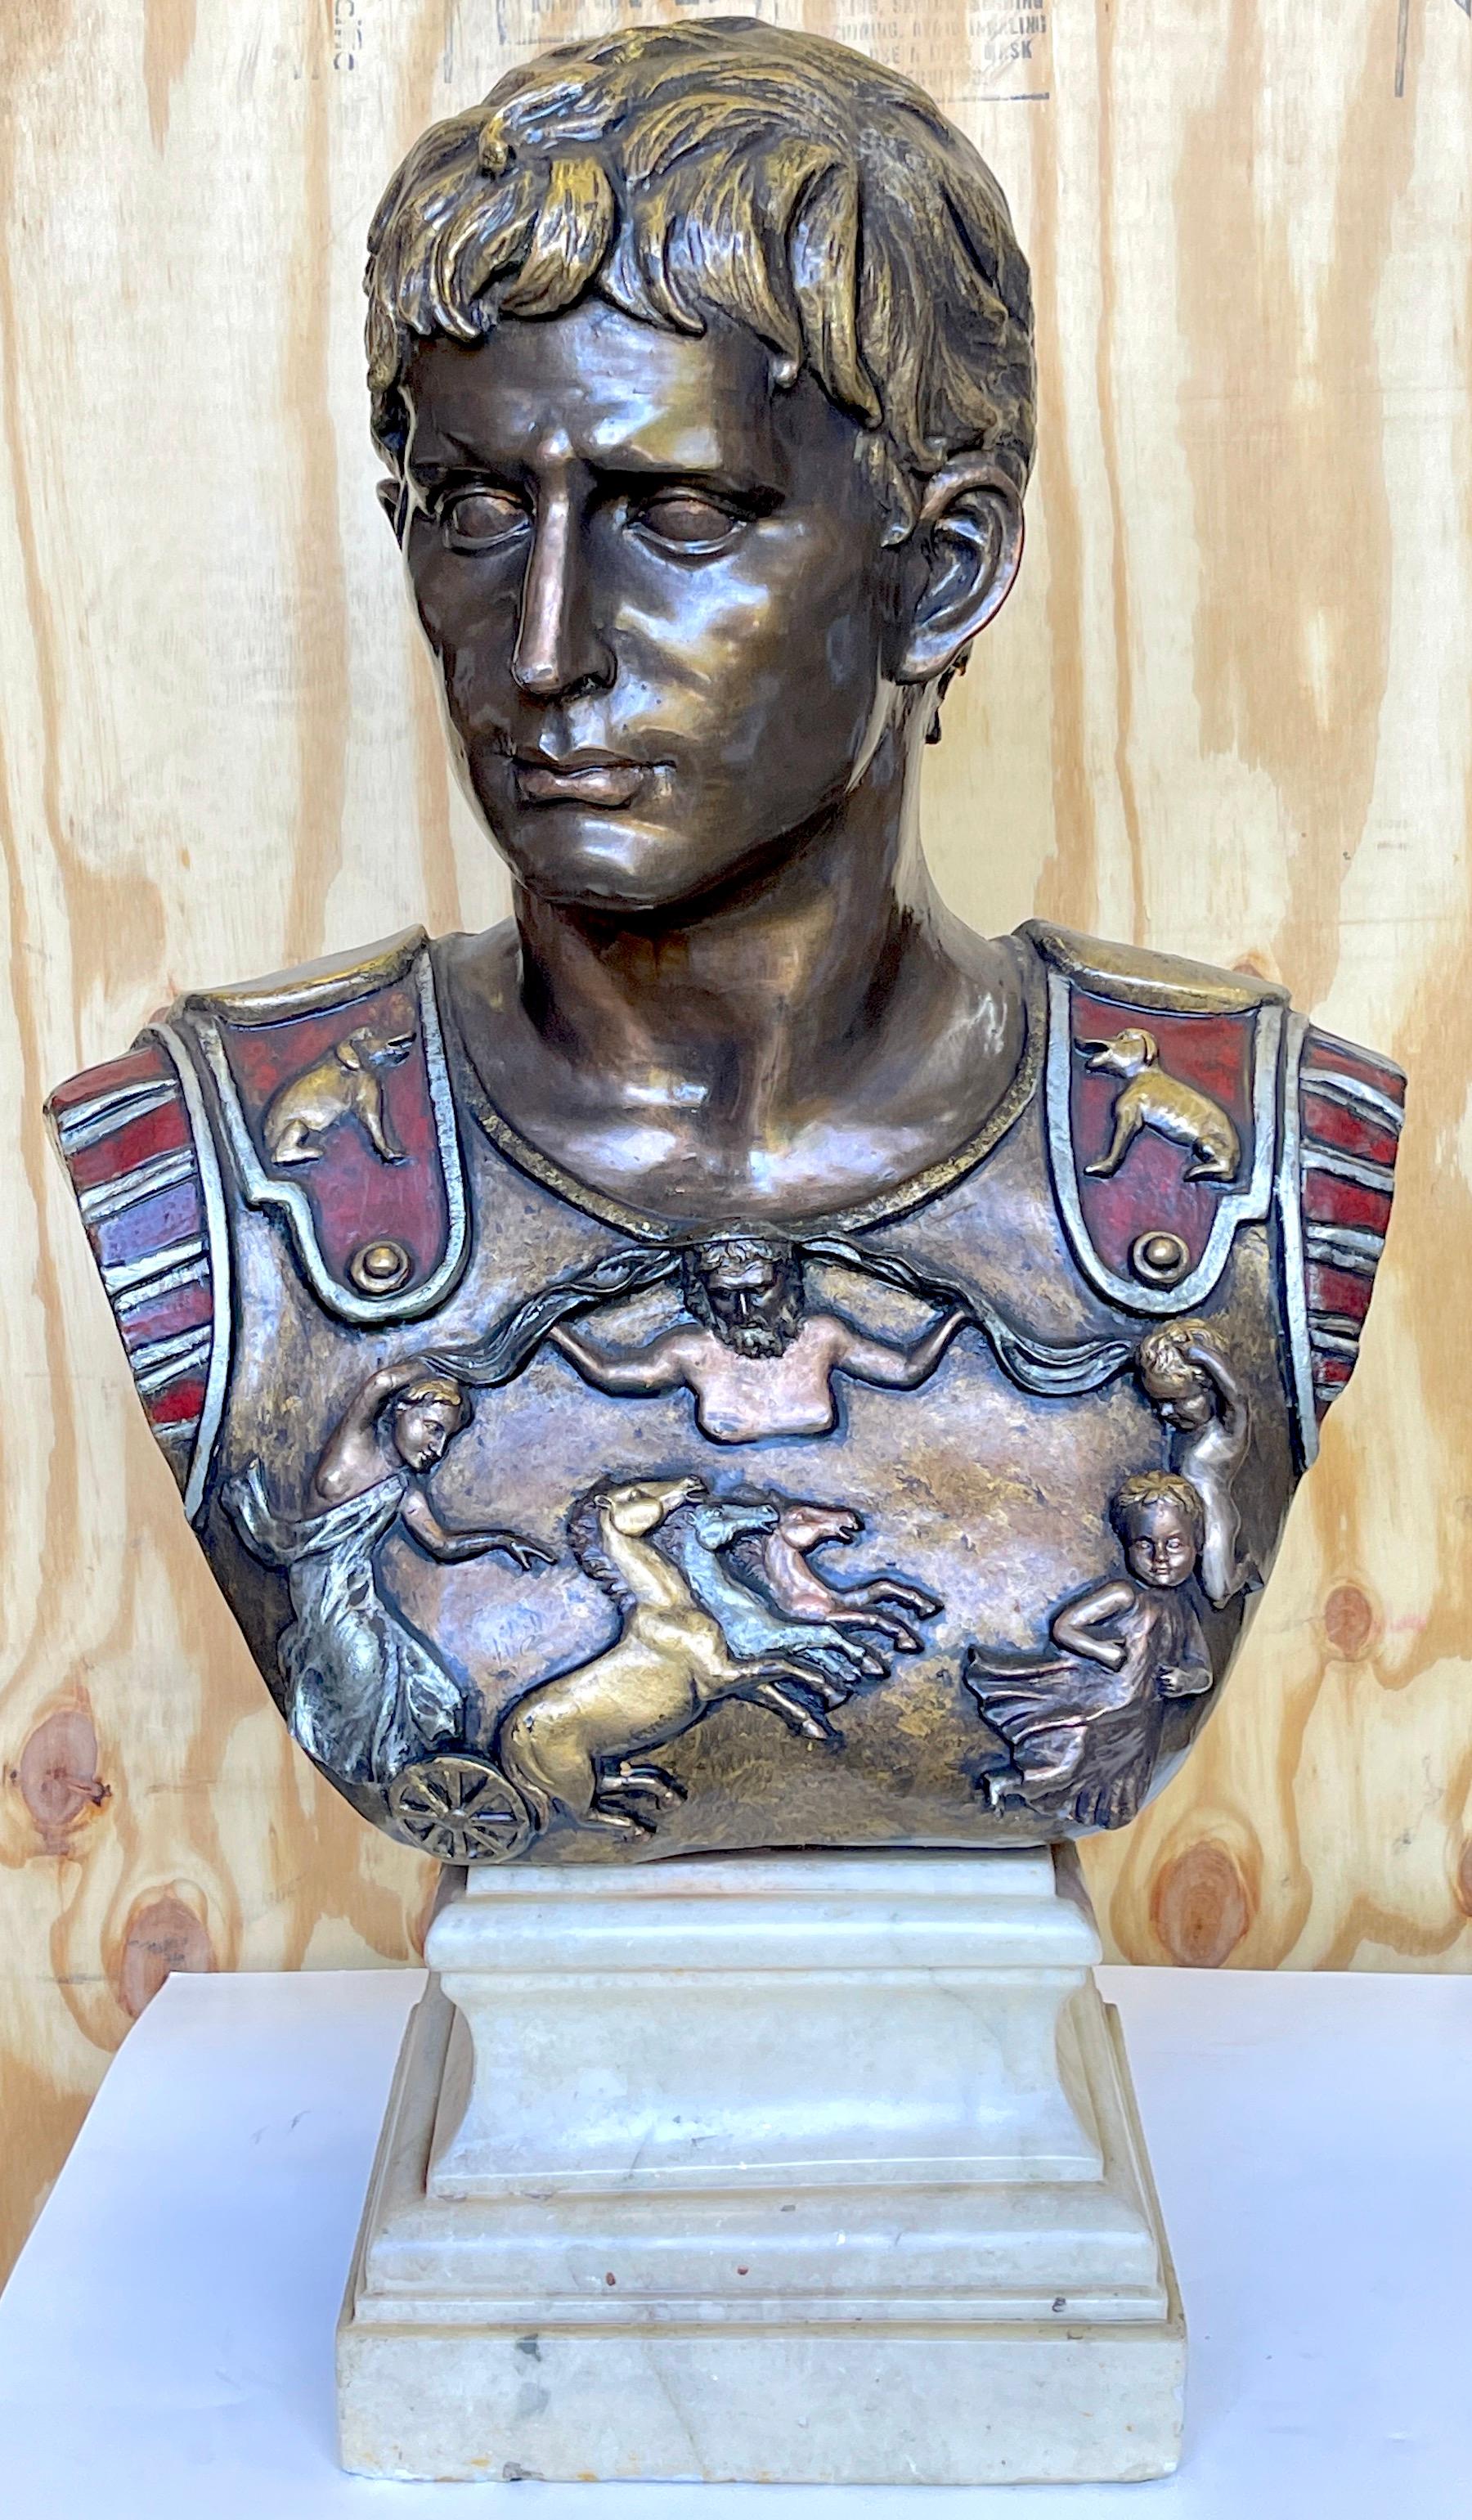 After the antique polychromed bronze bust of the Prima Porta Augustus Caesar.
Italy,mid-20th century 

A extraordinary, large scale, very heavy mid 20th century bronze example of the iconic Roman orignal full-length portrait statue of Augustus